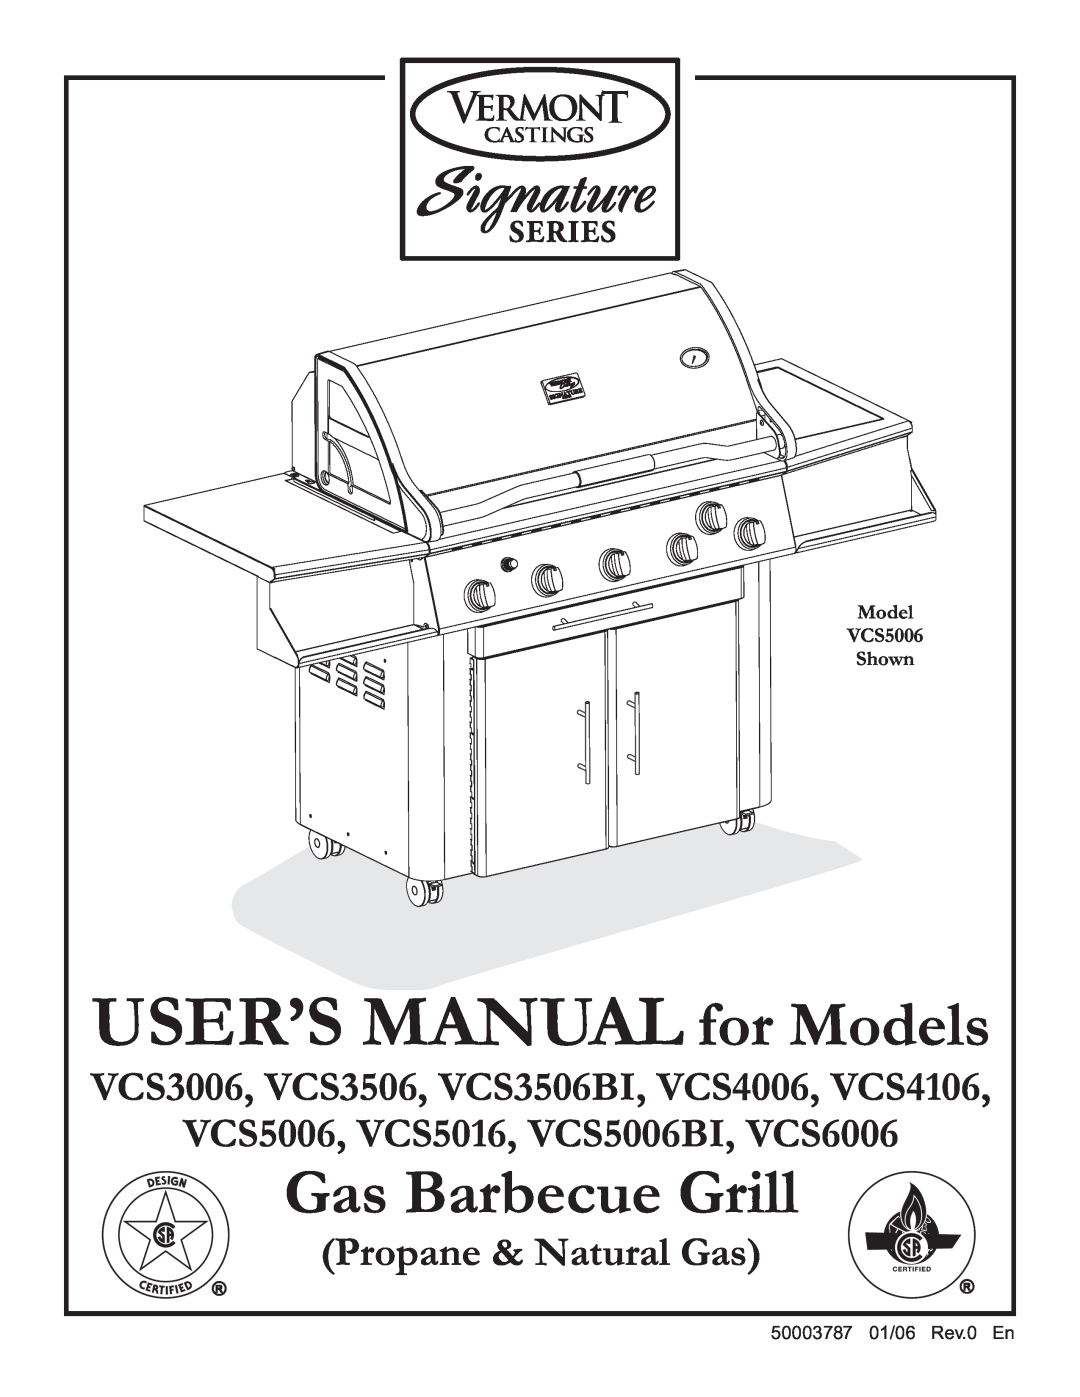 Vermont Casting VCS5006BI user manual USER’S MANUAL for Models, Gas Barbecue Grill, Propane & Natural Gas, Shown, Rev.0 